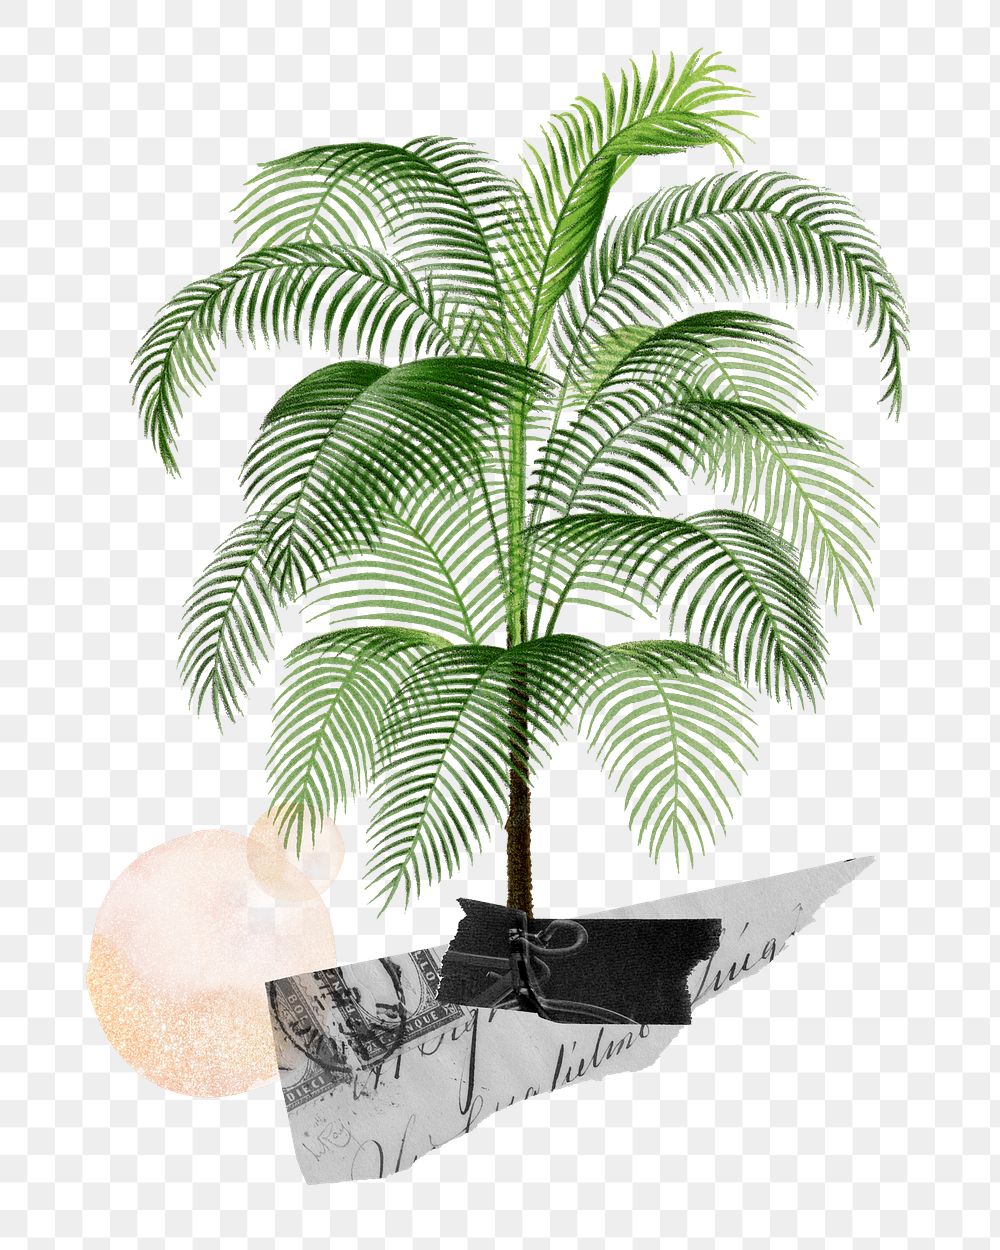 Tropical tree png sticker, transparent background